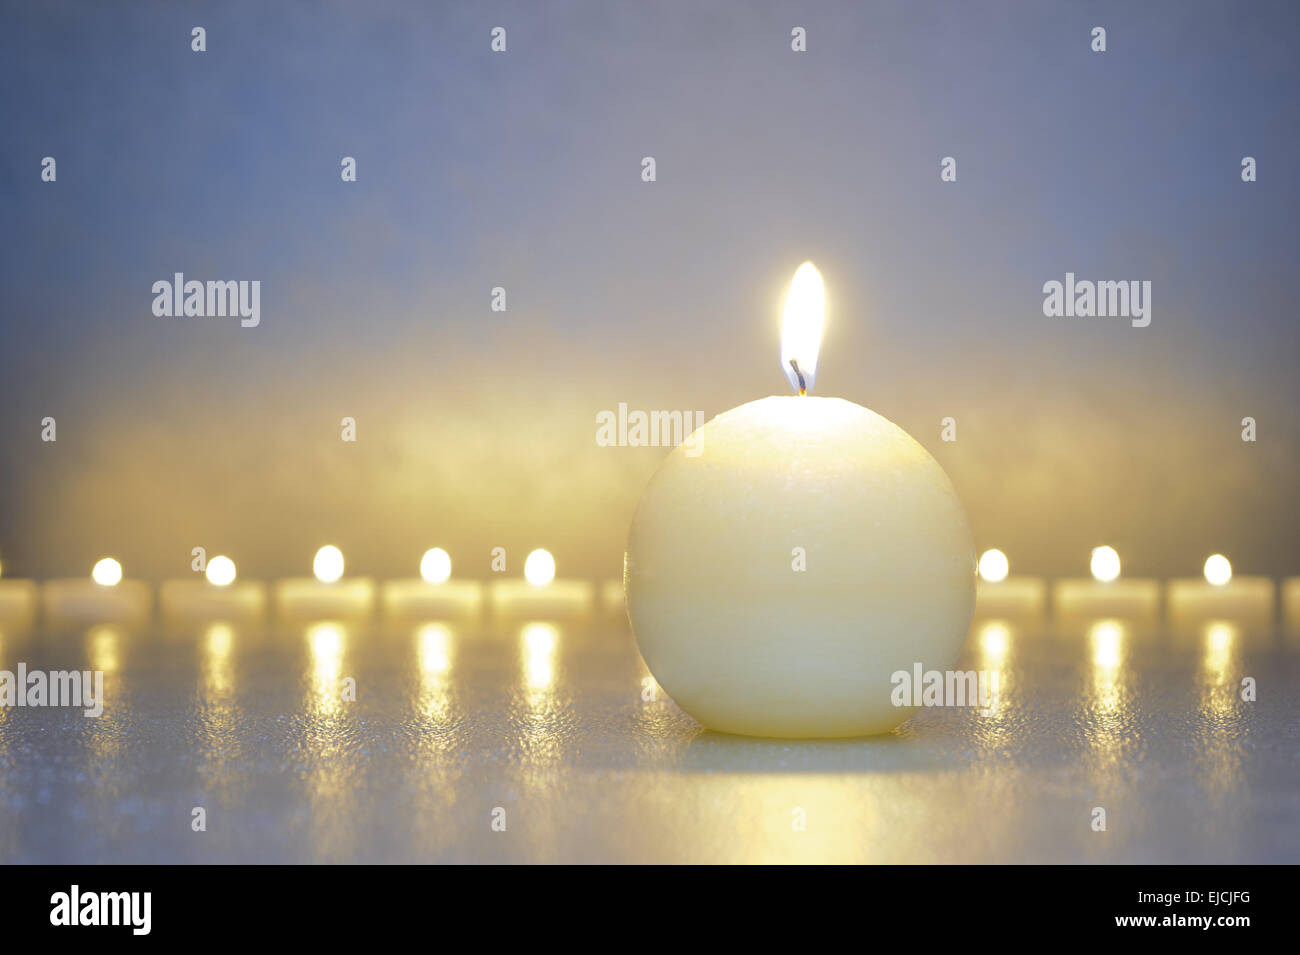 zen garden with candle lights in row Stock Photo